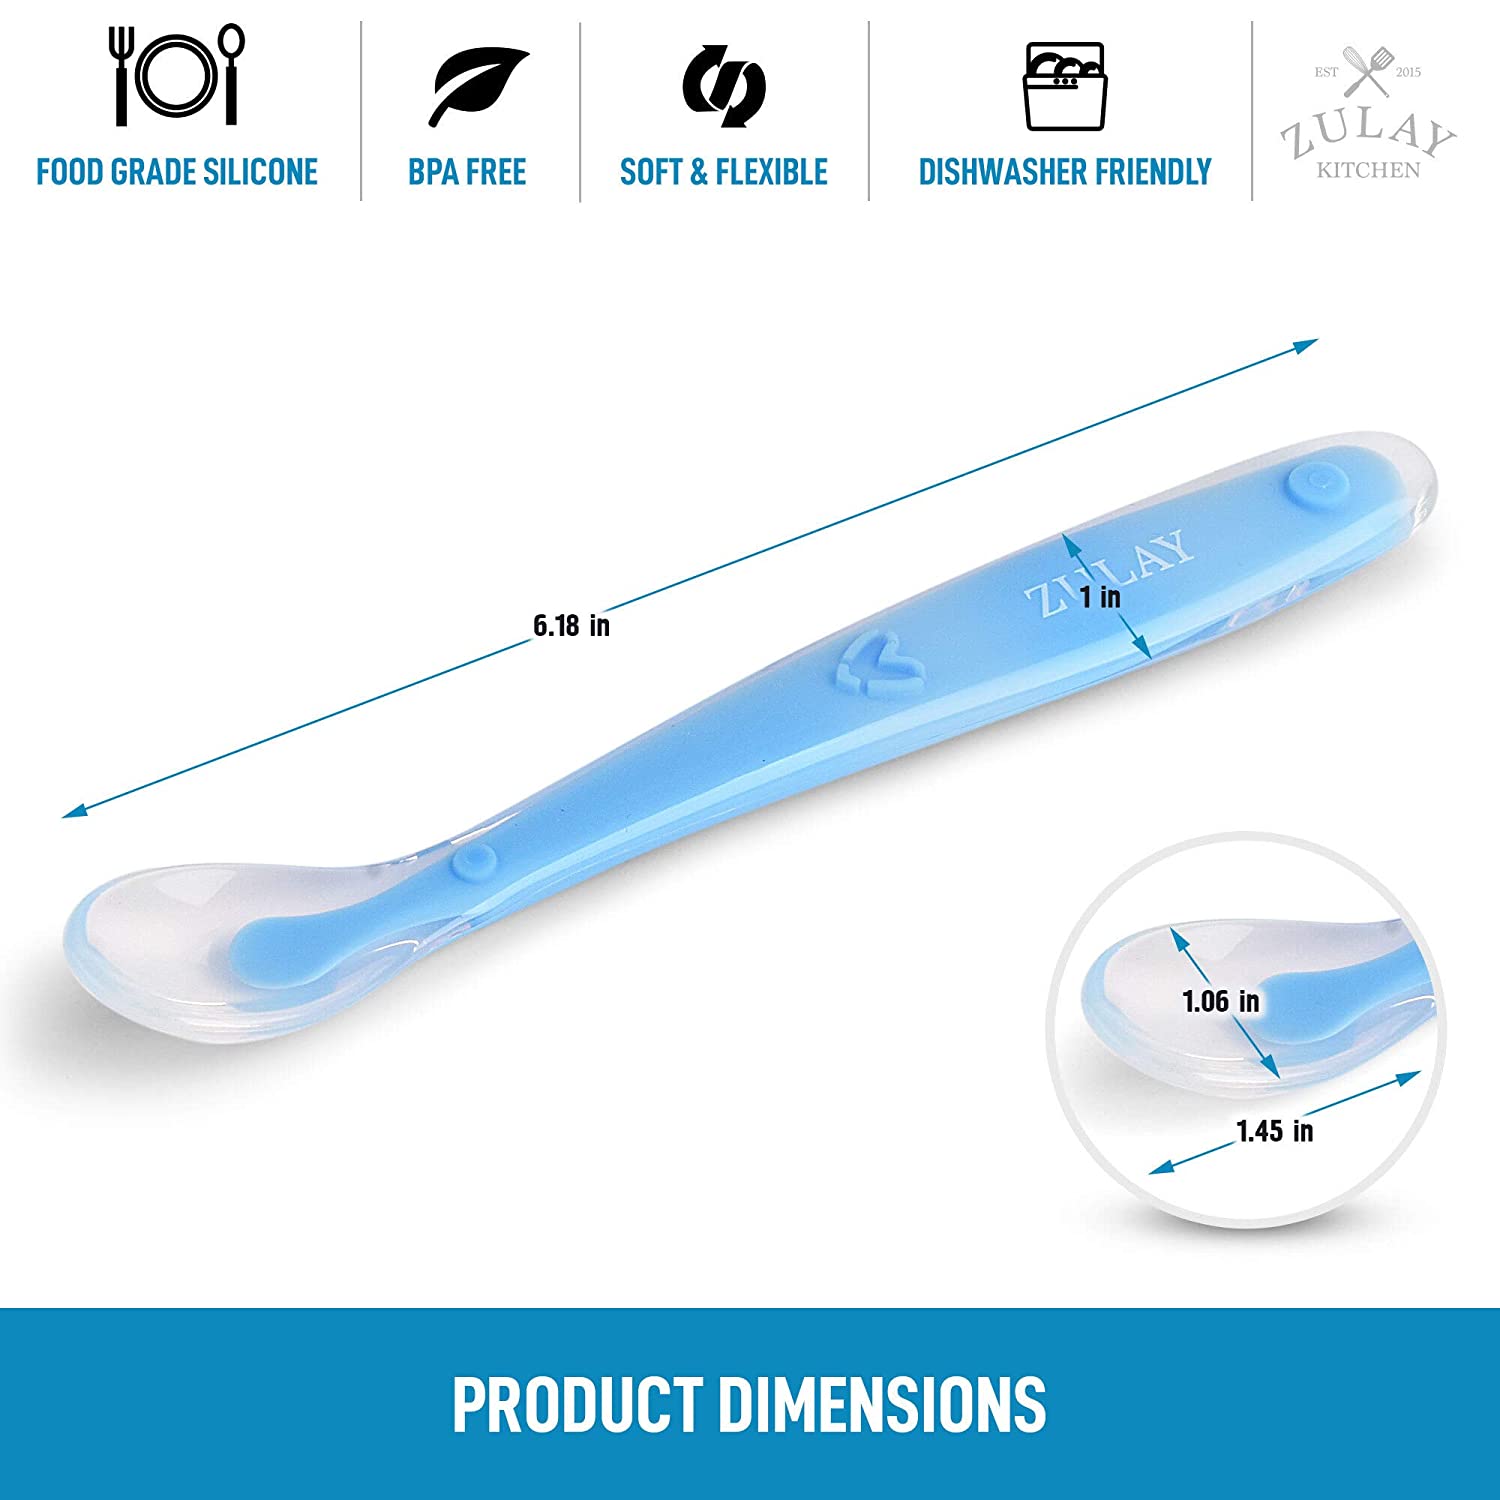 Olababy spoons are made from silicone therefore gentle on babies' gum. The  feeding spoon has longer stem and designed for adults to feed…